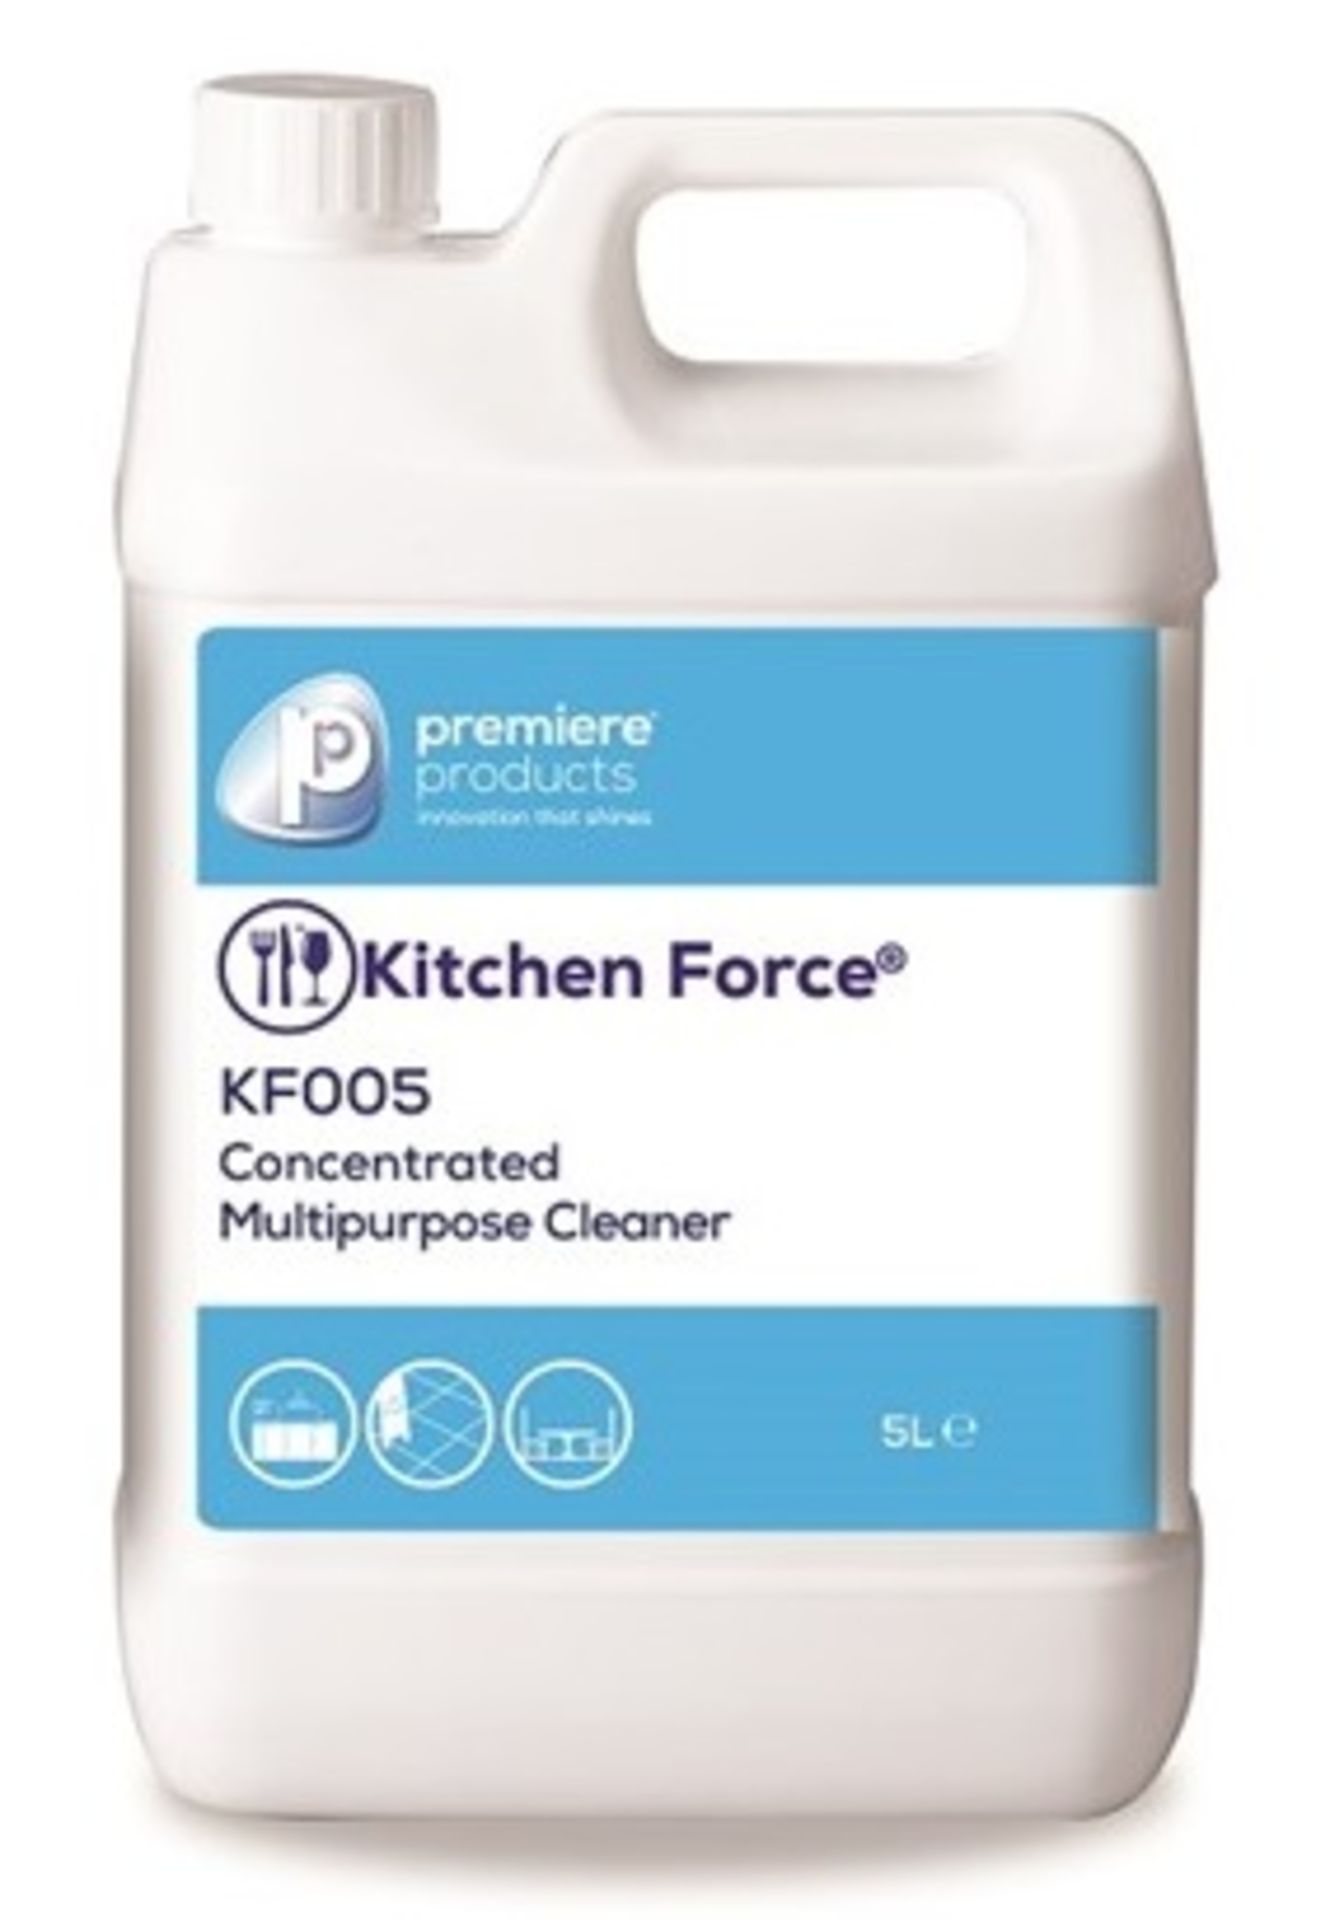 10 x Kitchen Force 5 Litre Concentrated Multipurpose Cleaner - Premiere Products - Includes 10 x 5